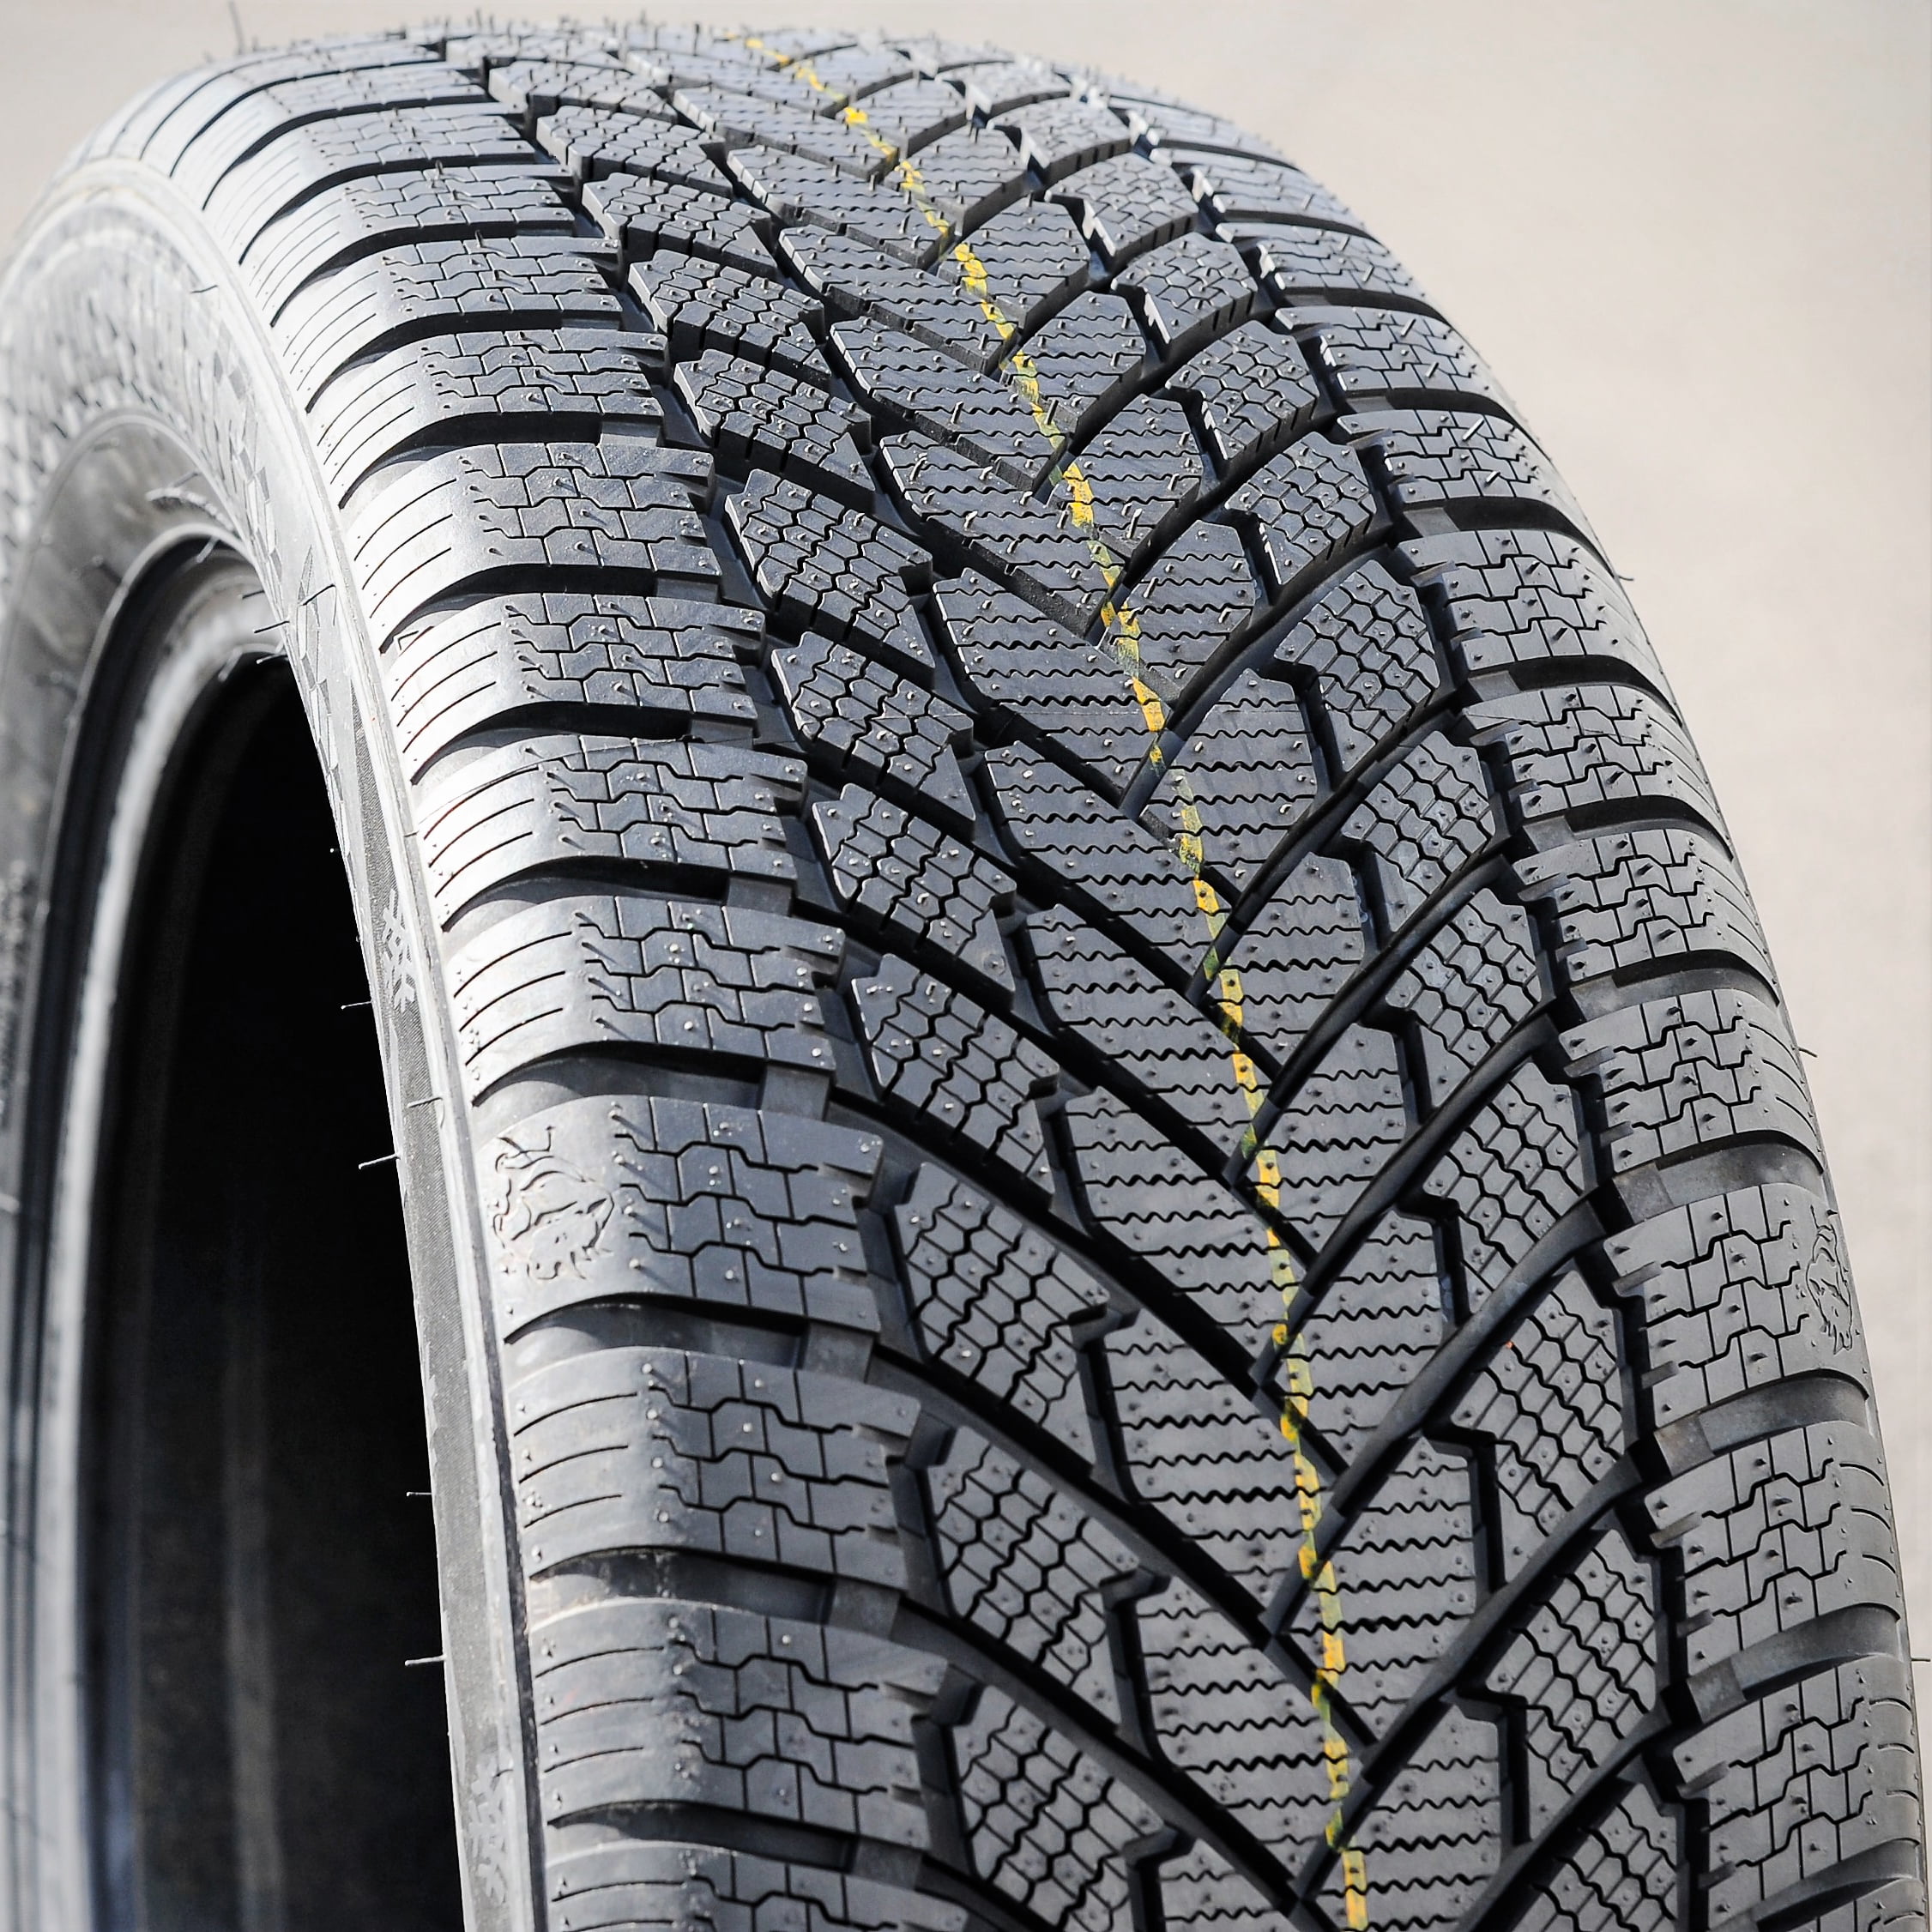 ContiWinterContact Snow (Studless) 175/65R15 Continental TS810S 84T Tire